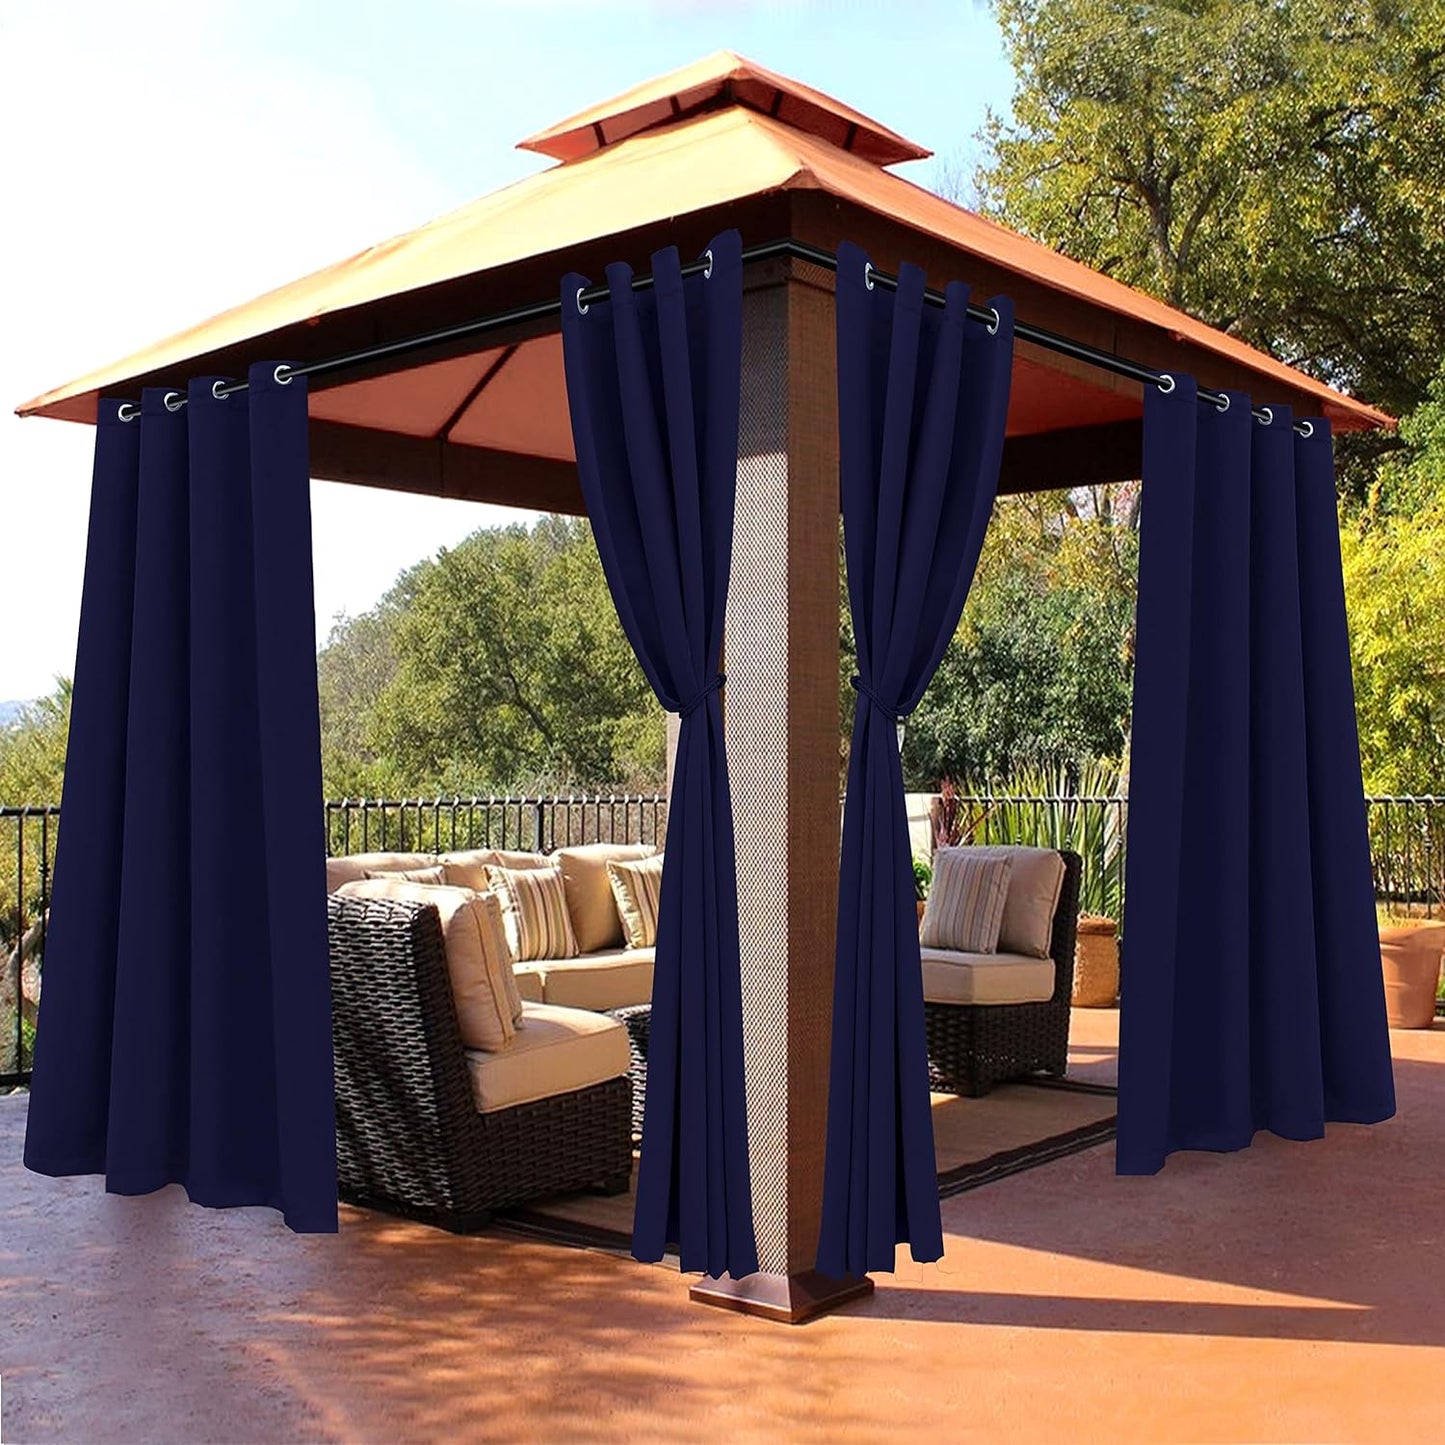 BONZER Outdoor Curtains for Patio Waterproof - Light Blocking Weather Resistant Privacy Grommet Blackout Curtains for Gazebo, Porch, Pergola, Cabana, Deck, Sunroom, 1 Panel, 52W X 84L Inch, Silver  BONZER Navy 52W X 84 Inch 